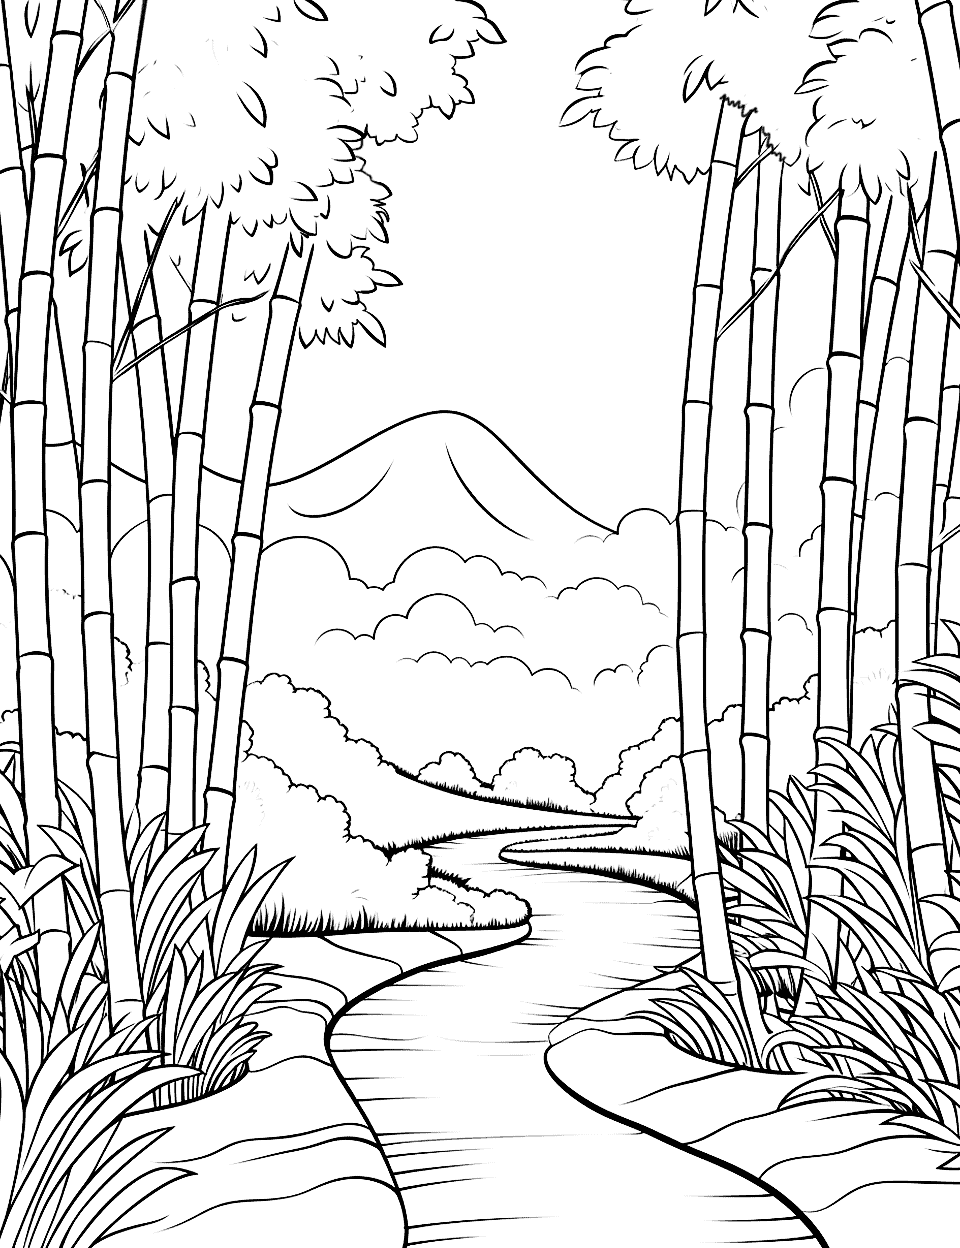 Bamboo Forest Path Nature Coloring Page - A path winding through a dense bamboo forest.